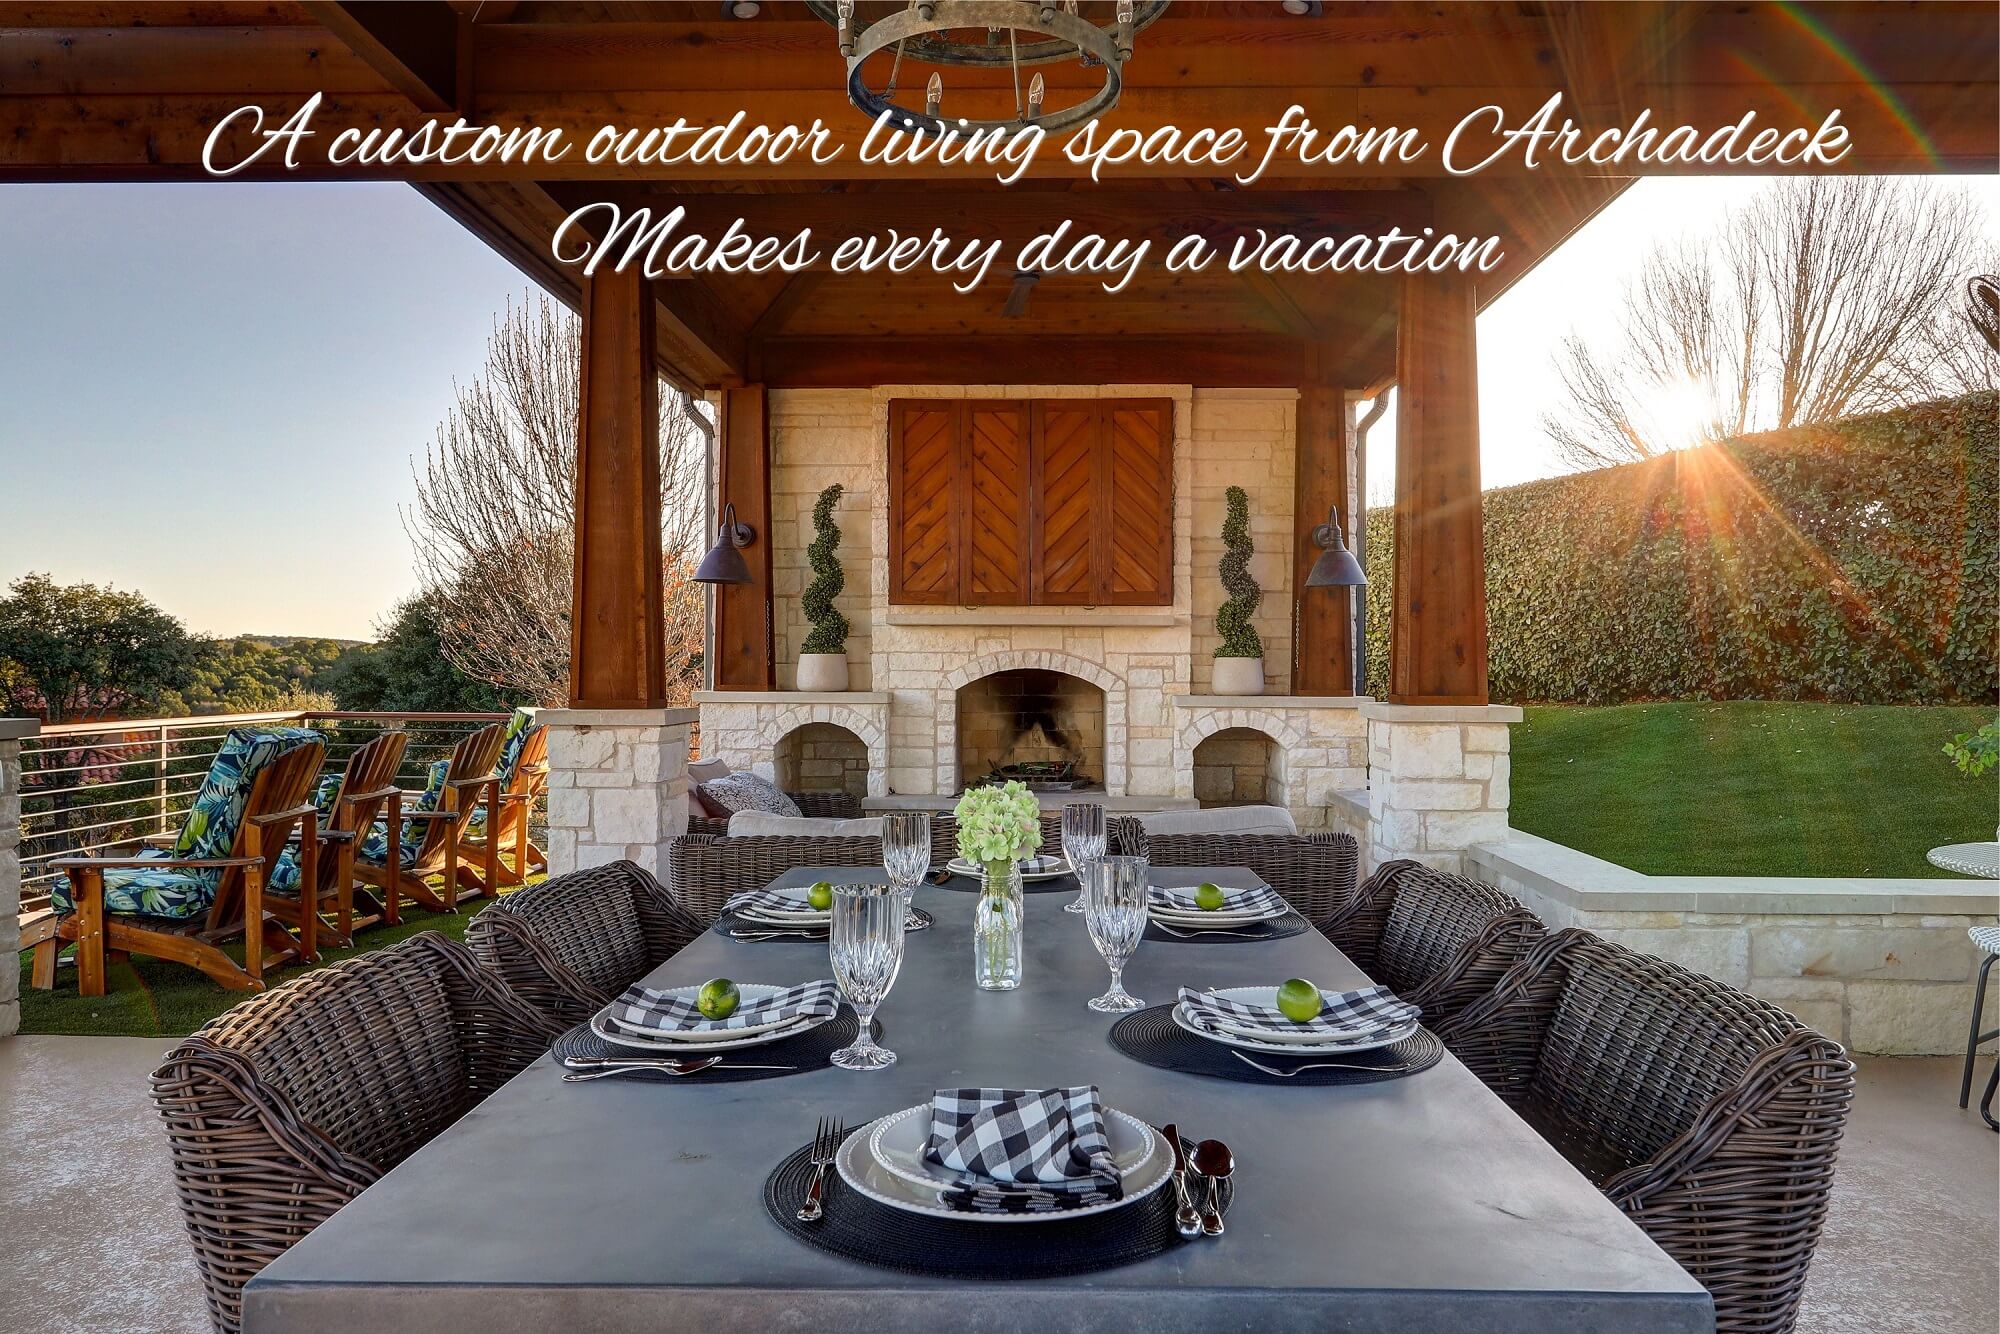 Dining area and outdoor fireplace on covered patio